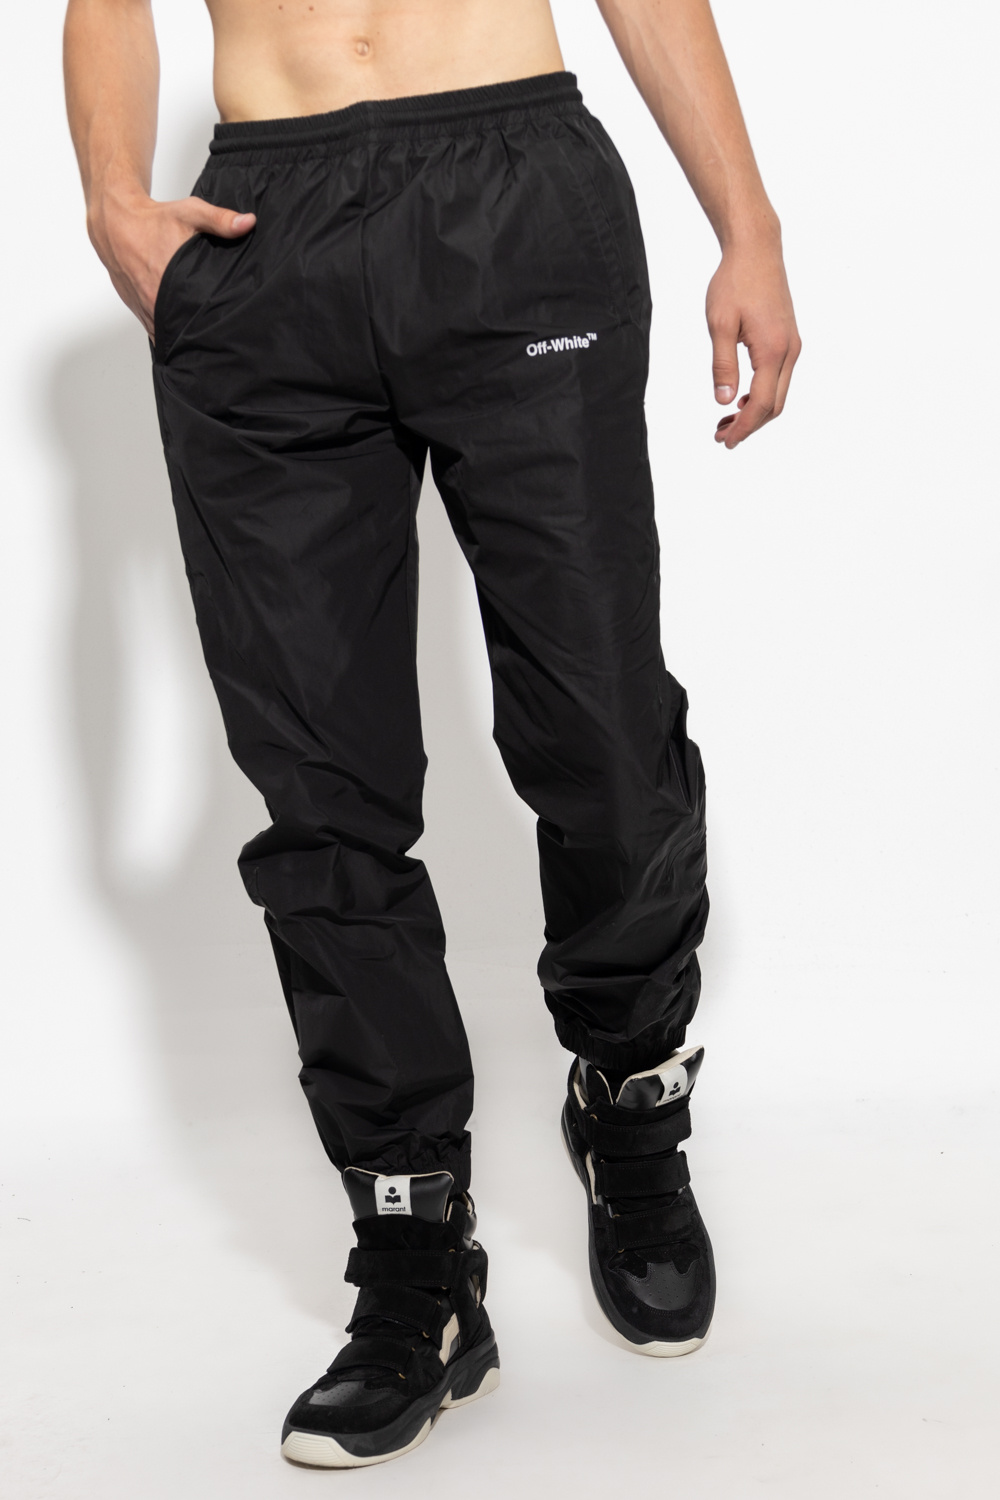 Off-White Track pants